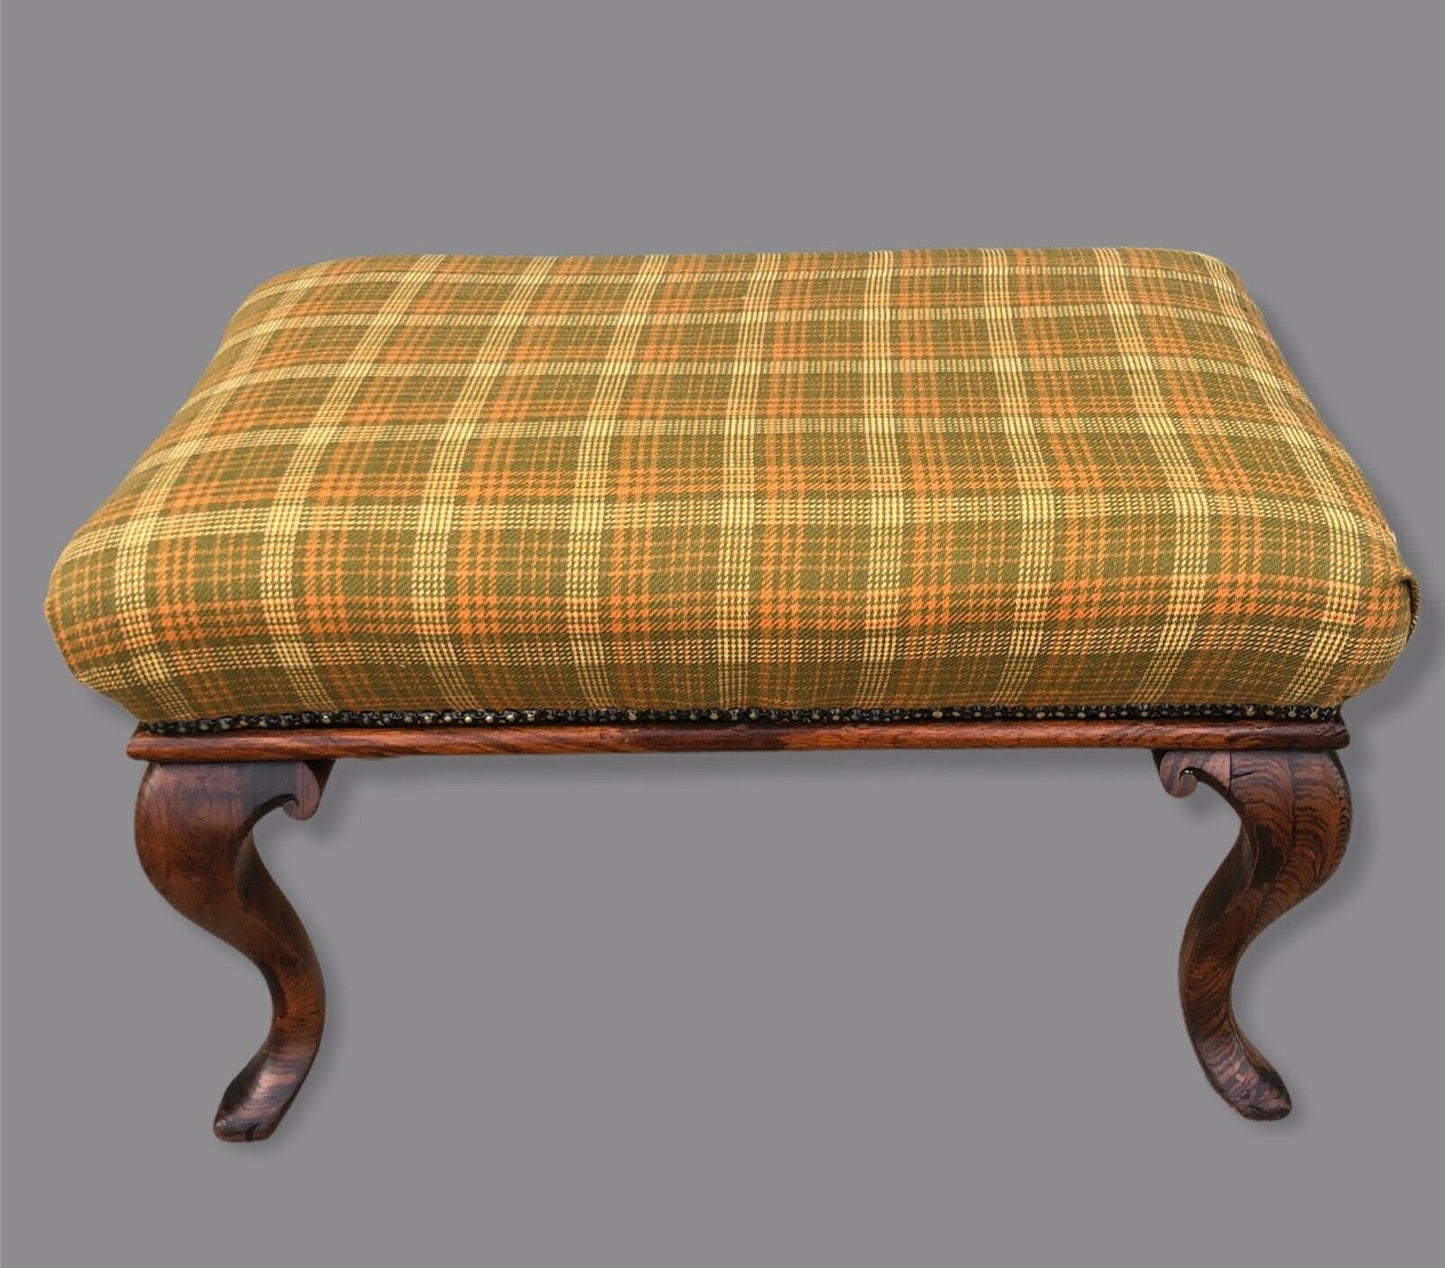 128.....Stunning Antique Rosewood Stool Dating From The Early 19th Century ( sold )